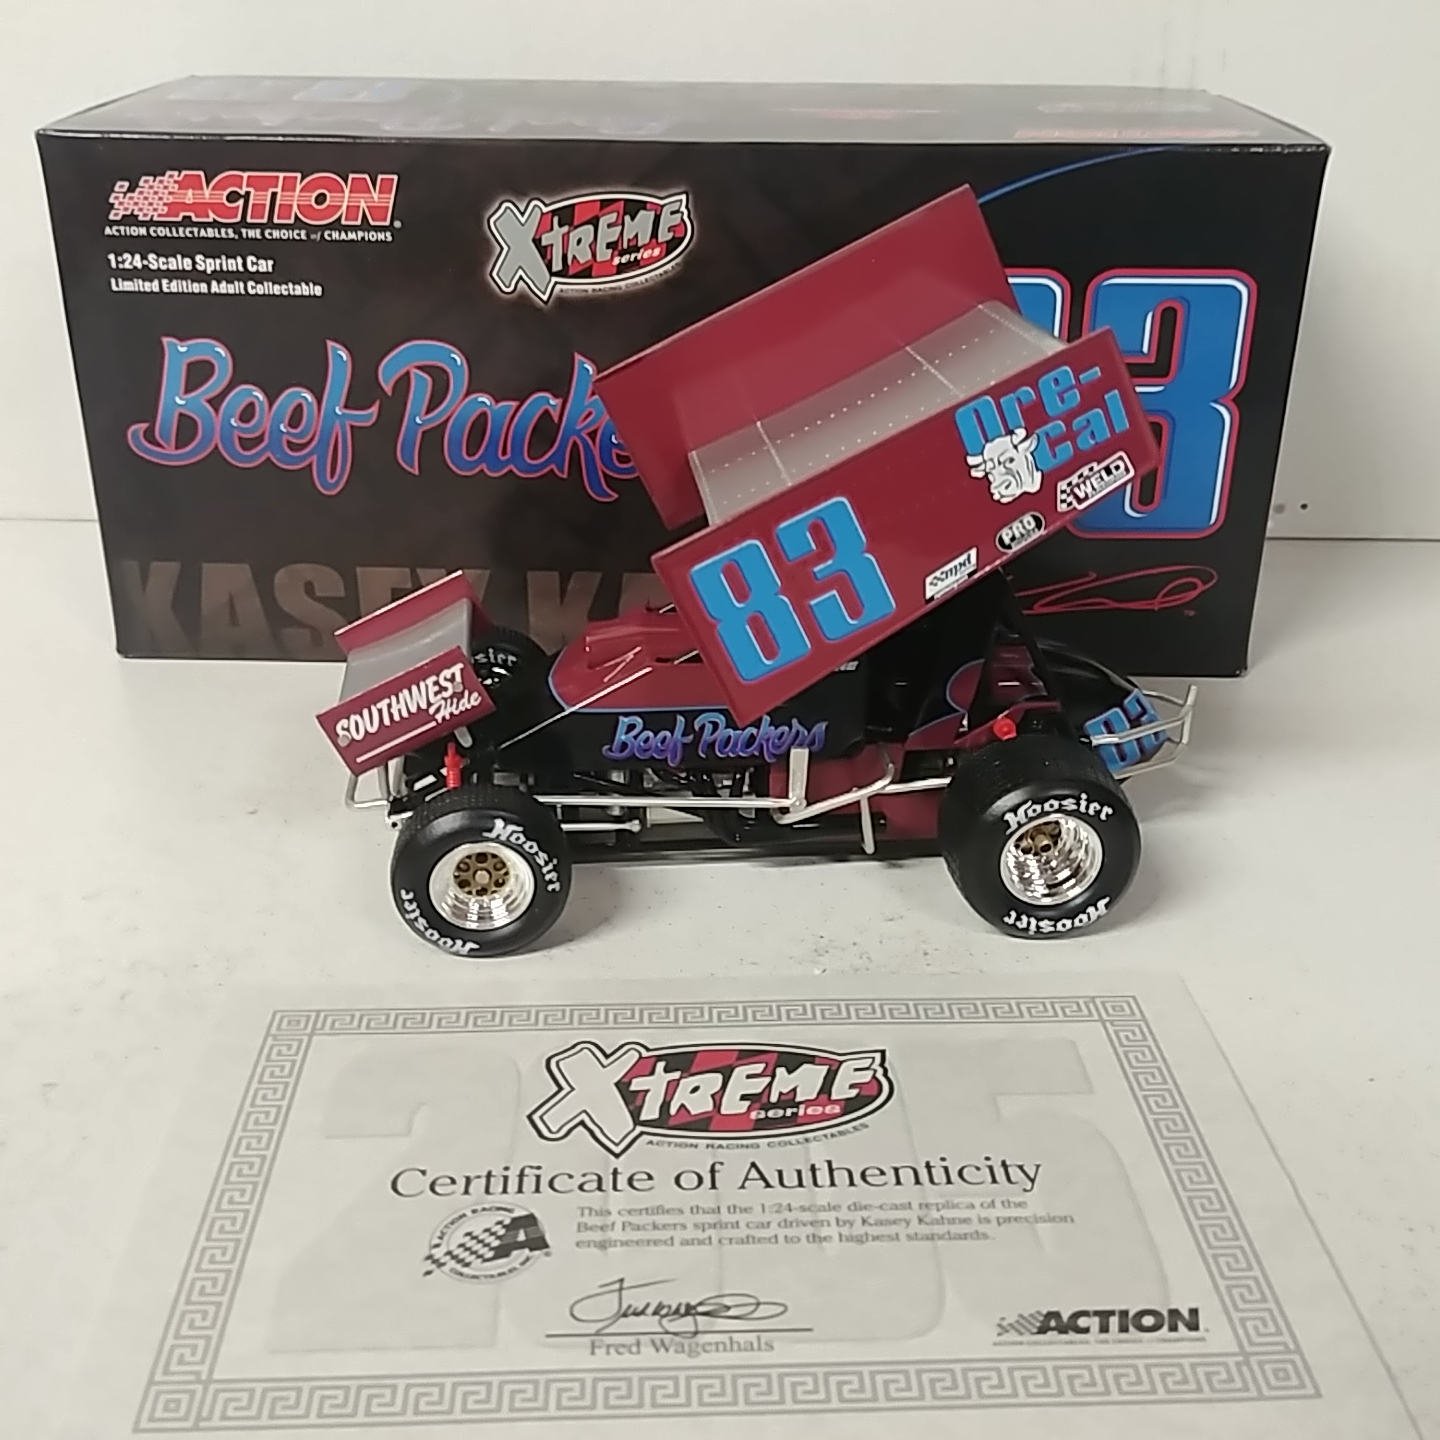 2003 Kasey Kahne 1/24th Beef Packers sprint car